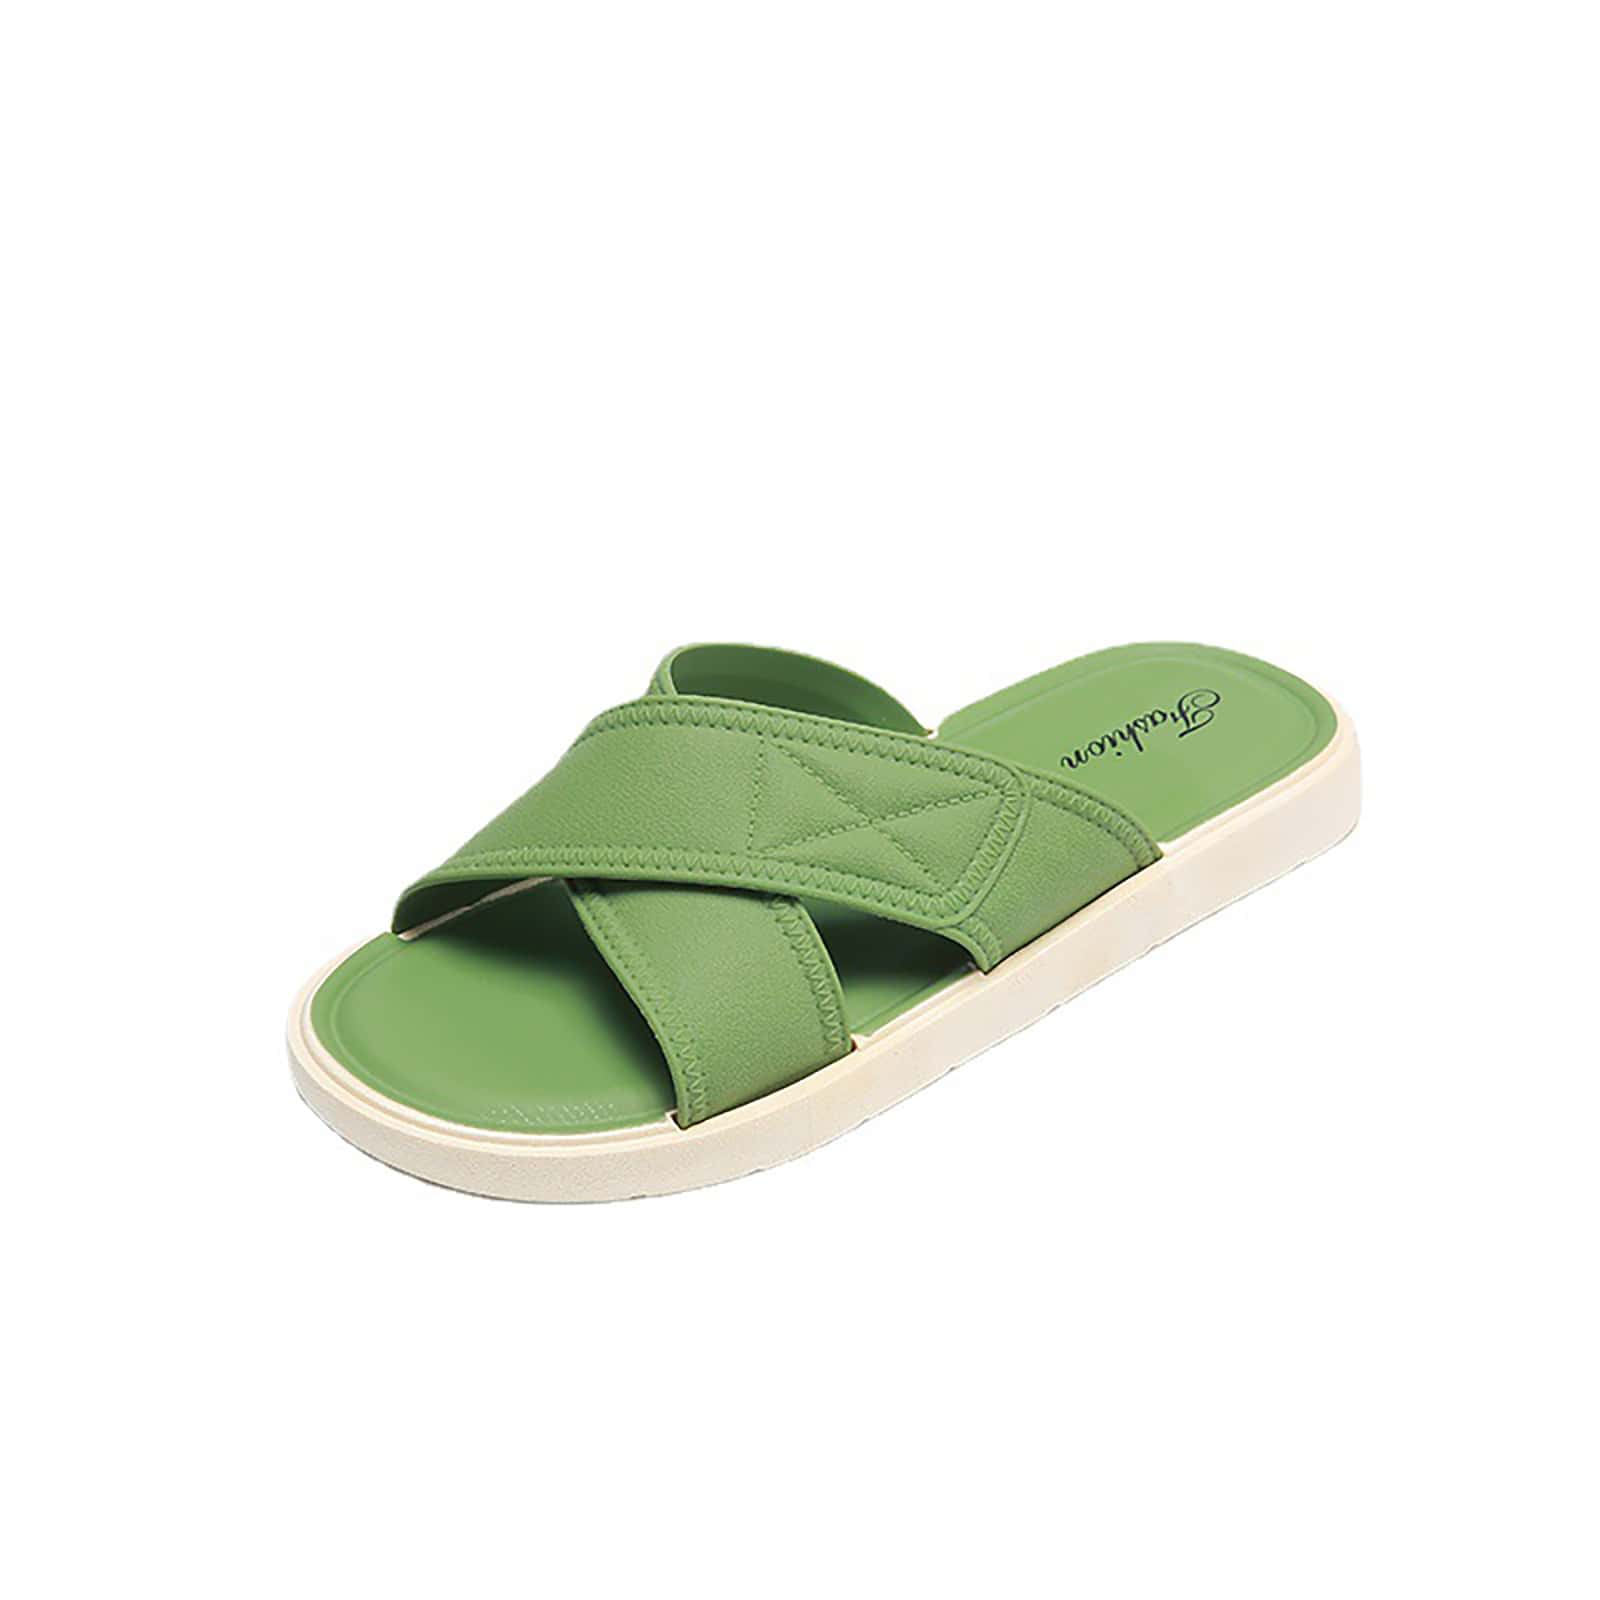 New Arrival Simple, Elegant And Versatile Slippers With Soft Pvc Outsole For Anti-Slip On The Beach And In Home Bathroom - Suitable For Indoor And Outdoor Wear, Giving You A Chic And Fresh Ins Look-Green-11